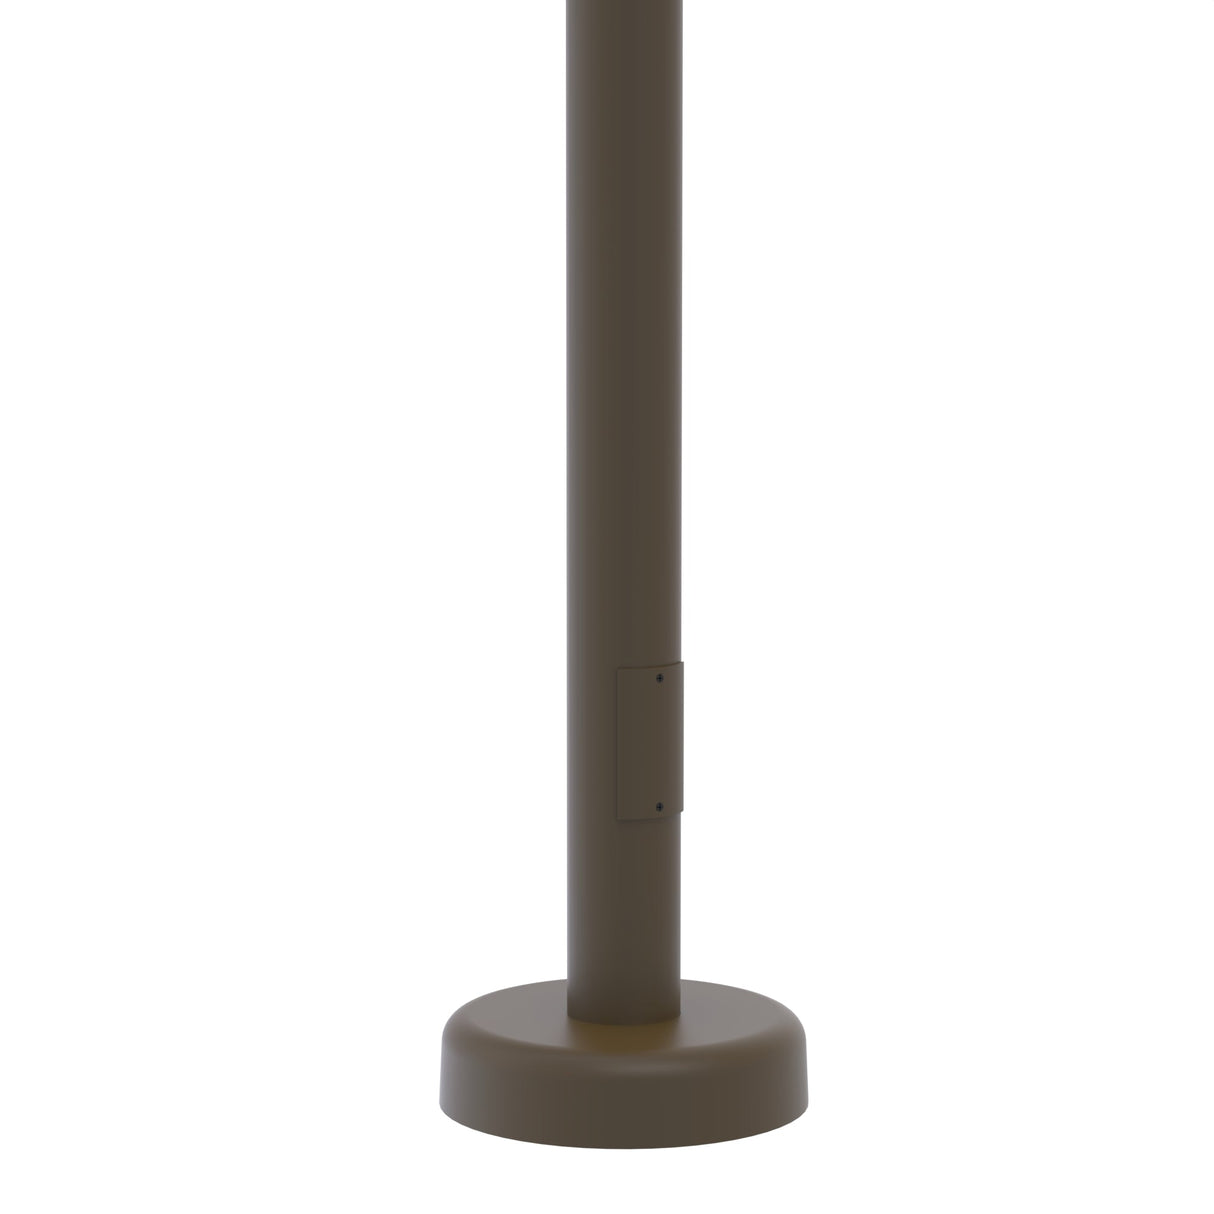 20' Tall x 6.0" Base OD x 4.0" Top OD x 0.188" Thick, Round Tapered Aluminum, Hinged Anchor Base Light Pole